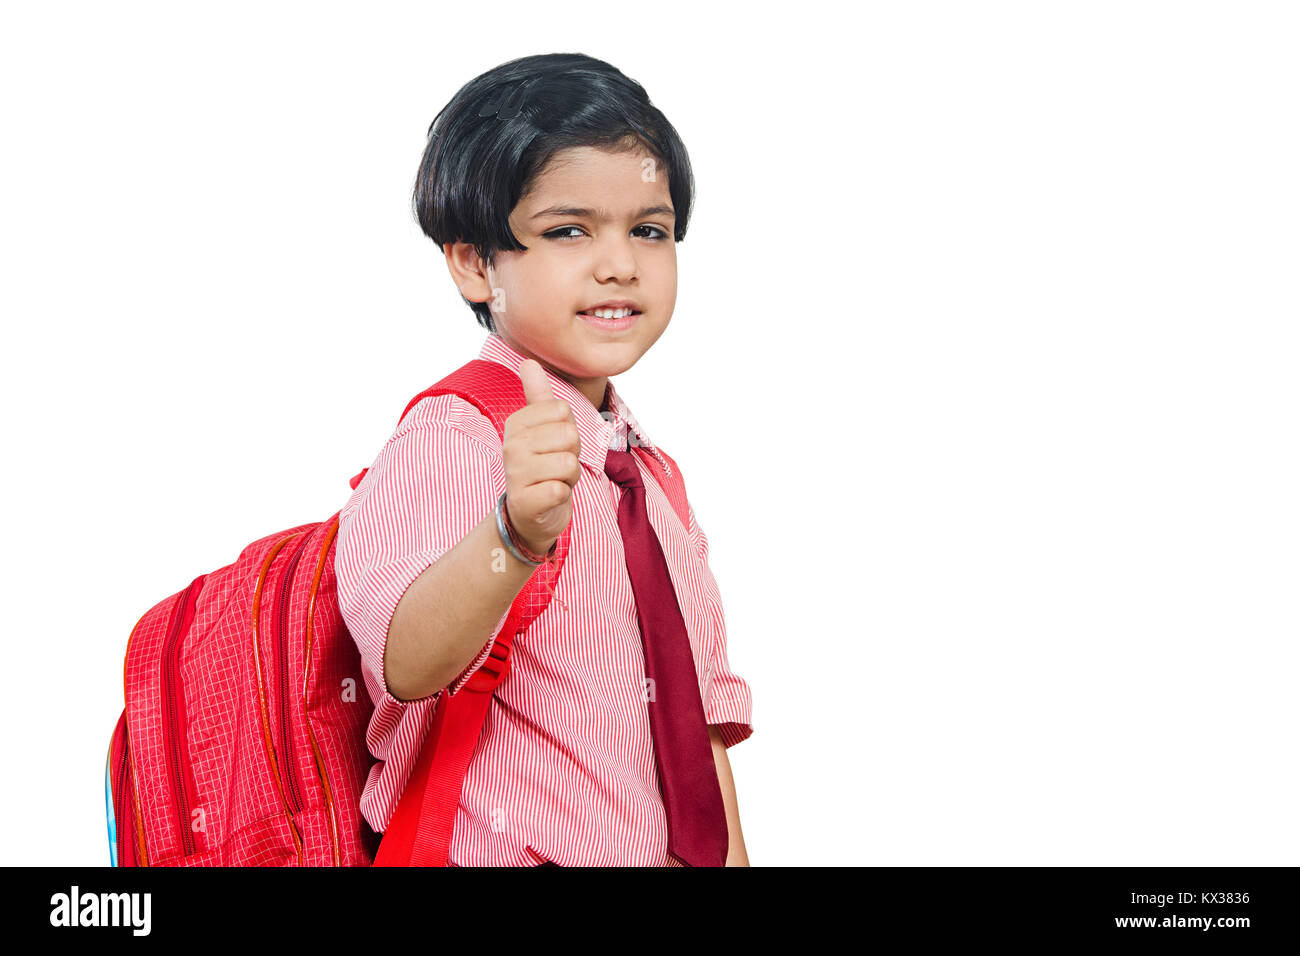 1 Indian School Kid Girl Showing Thumbs up Success Education Stock Photo